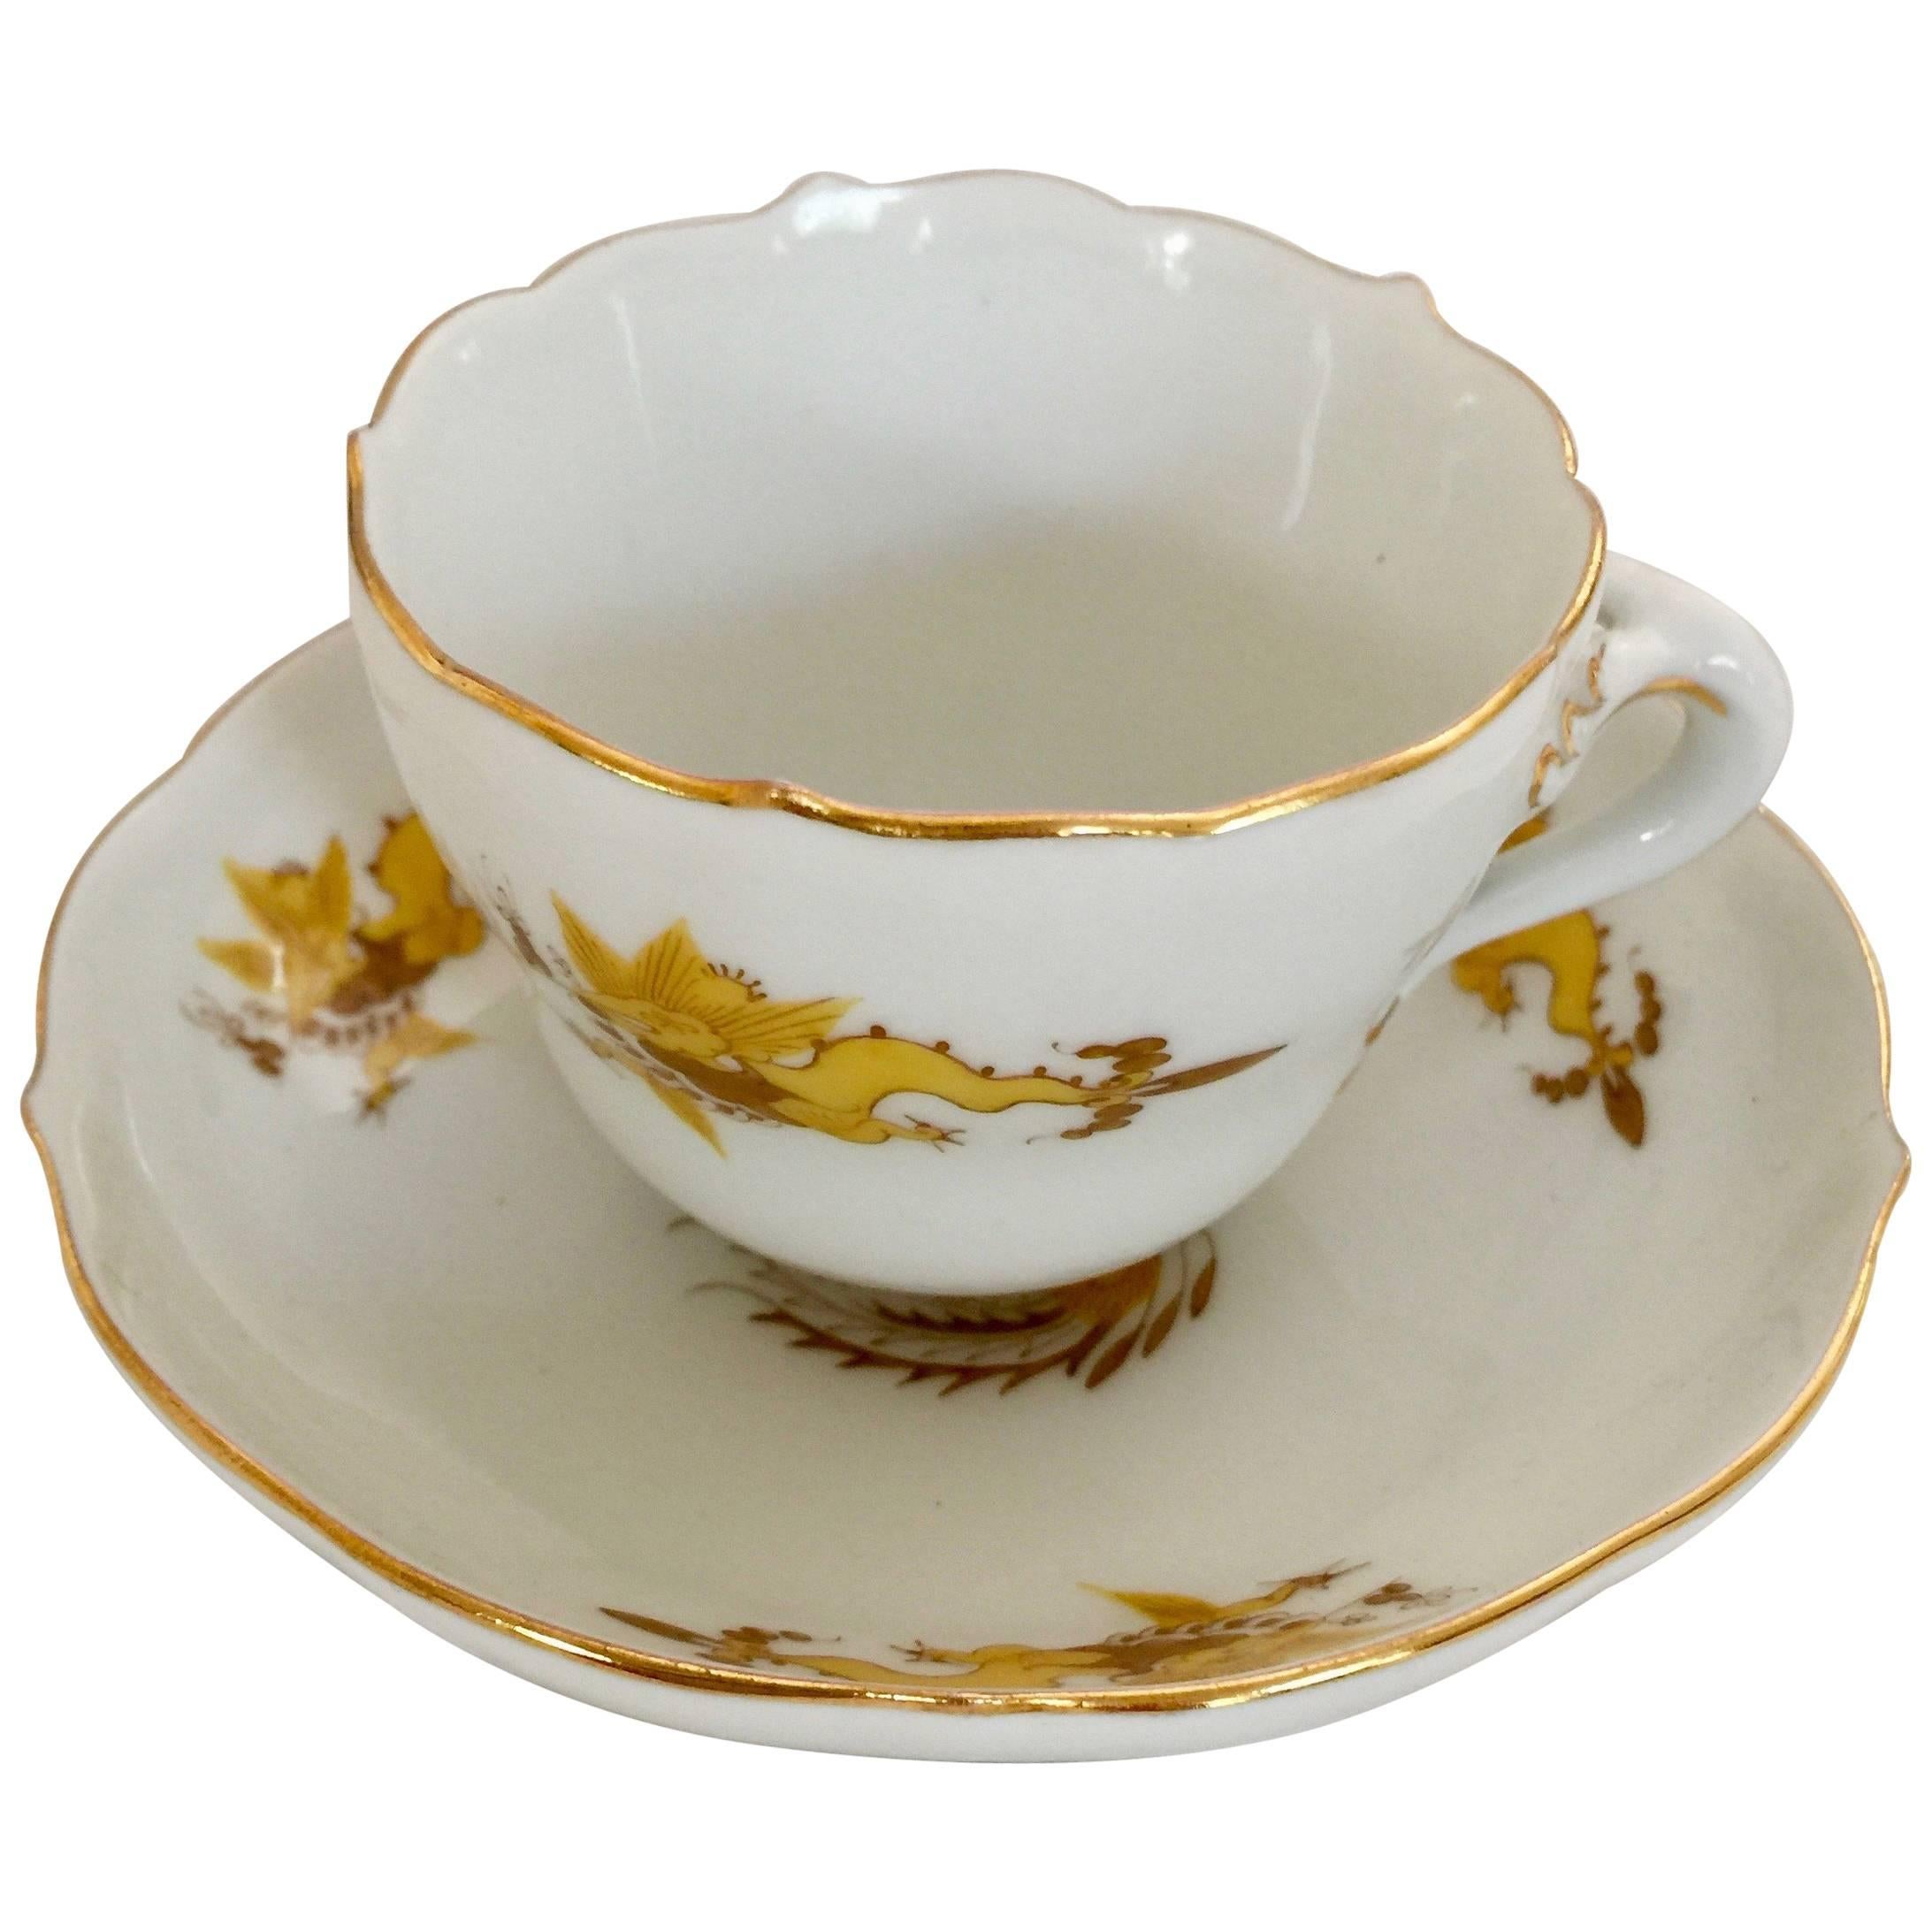 19th Century Meissen Porcelain Scalloped Yellow Dragon Demitasse Cup and Saucer